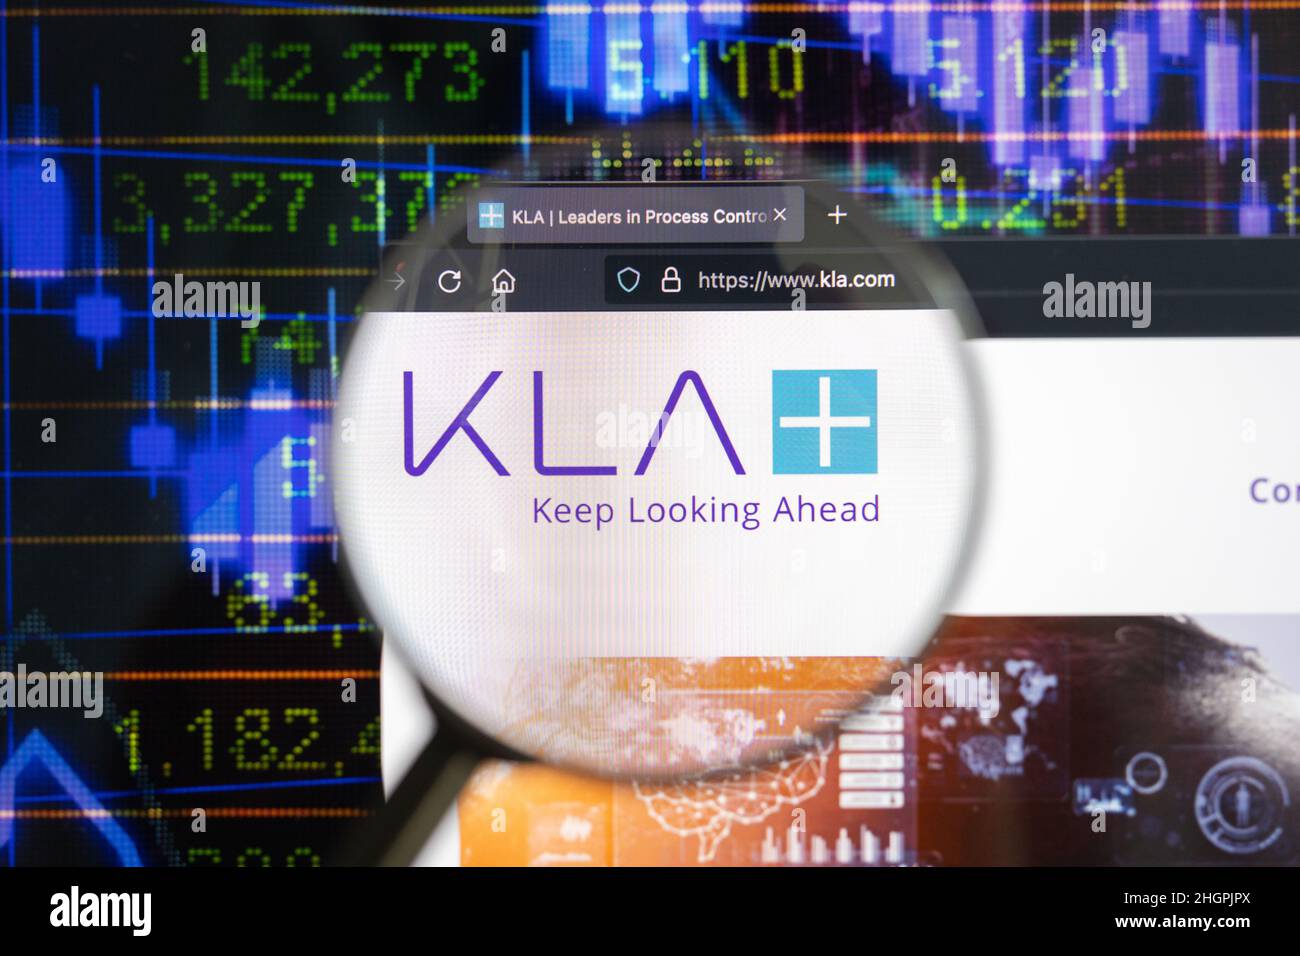 KLA corporation logo on a website with blurry stock market developments in the background, seen on a computer screen through a magnifying glass. Stock Photo